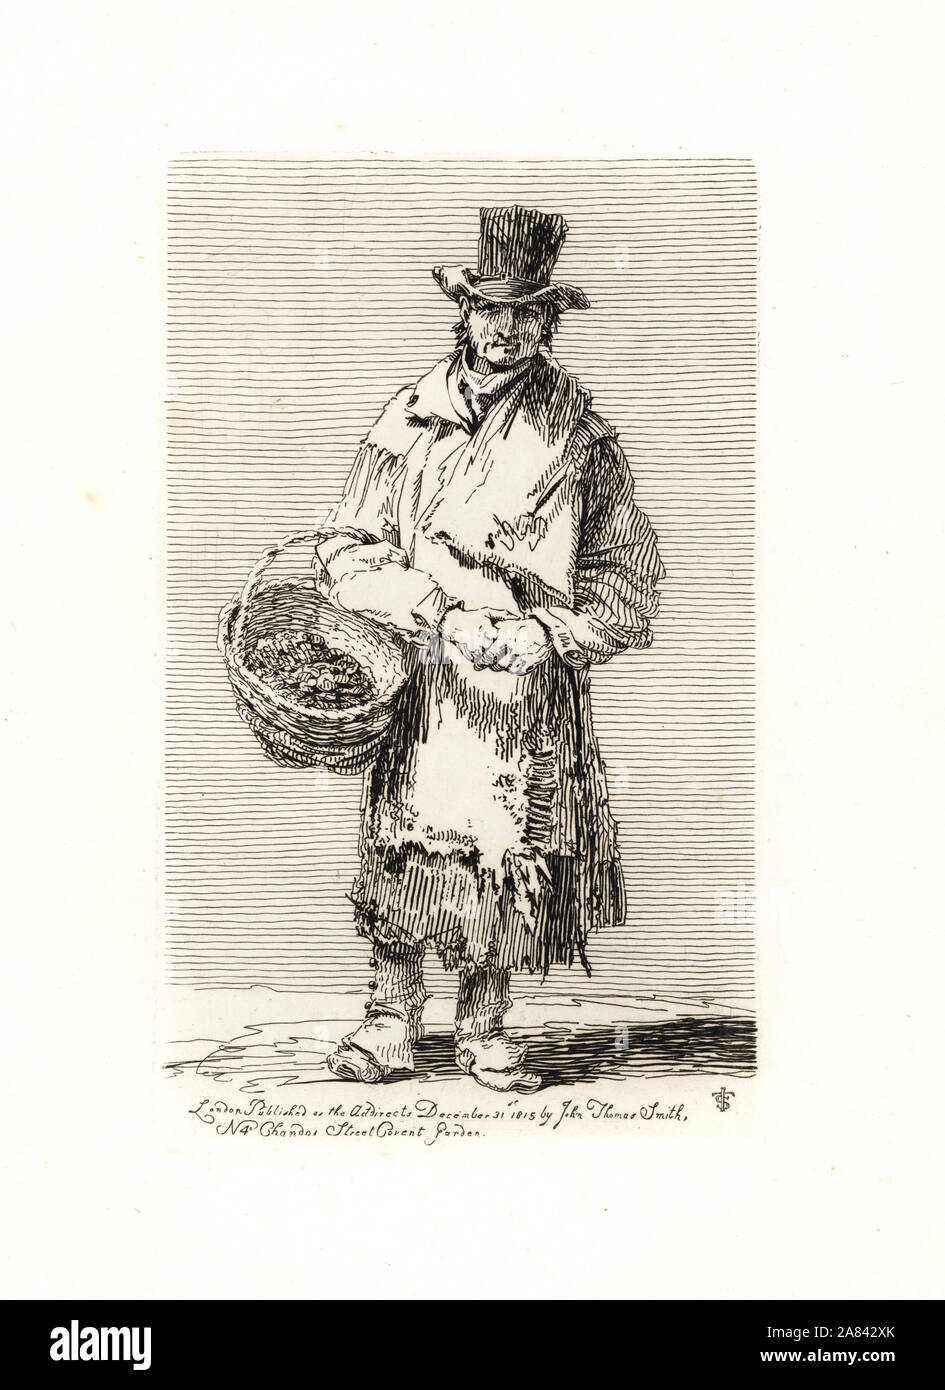 William Friday, a Simpler, supplier of herbs. Copperplate etching drawn and engraved by John Thomas Smith from his Vagabondiana, Anecdotes of Mendicant Wanderers  through the Streets of London, 1817. Stock Photo